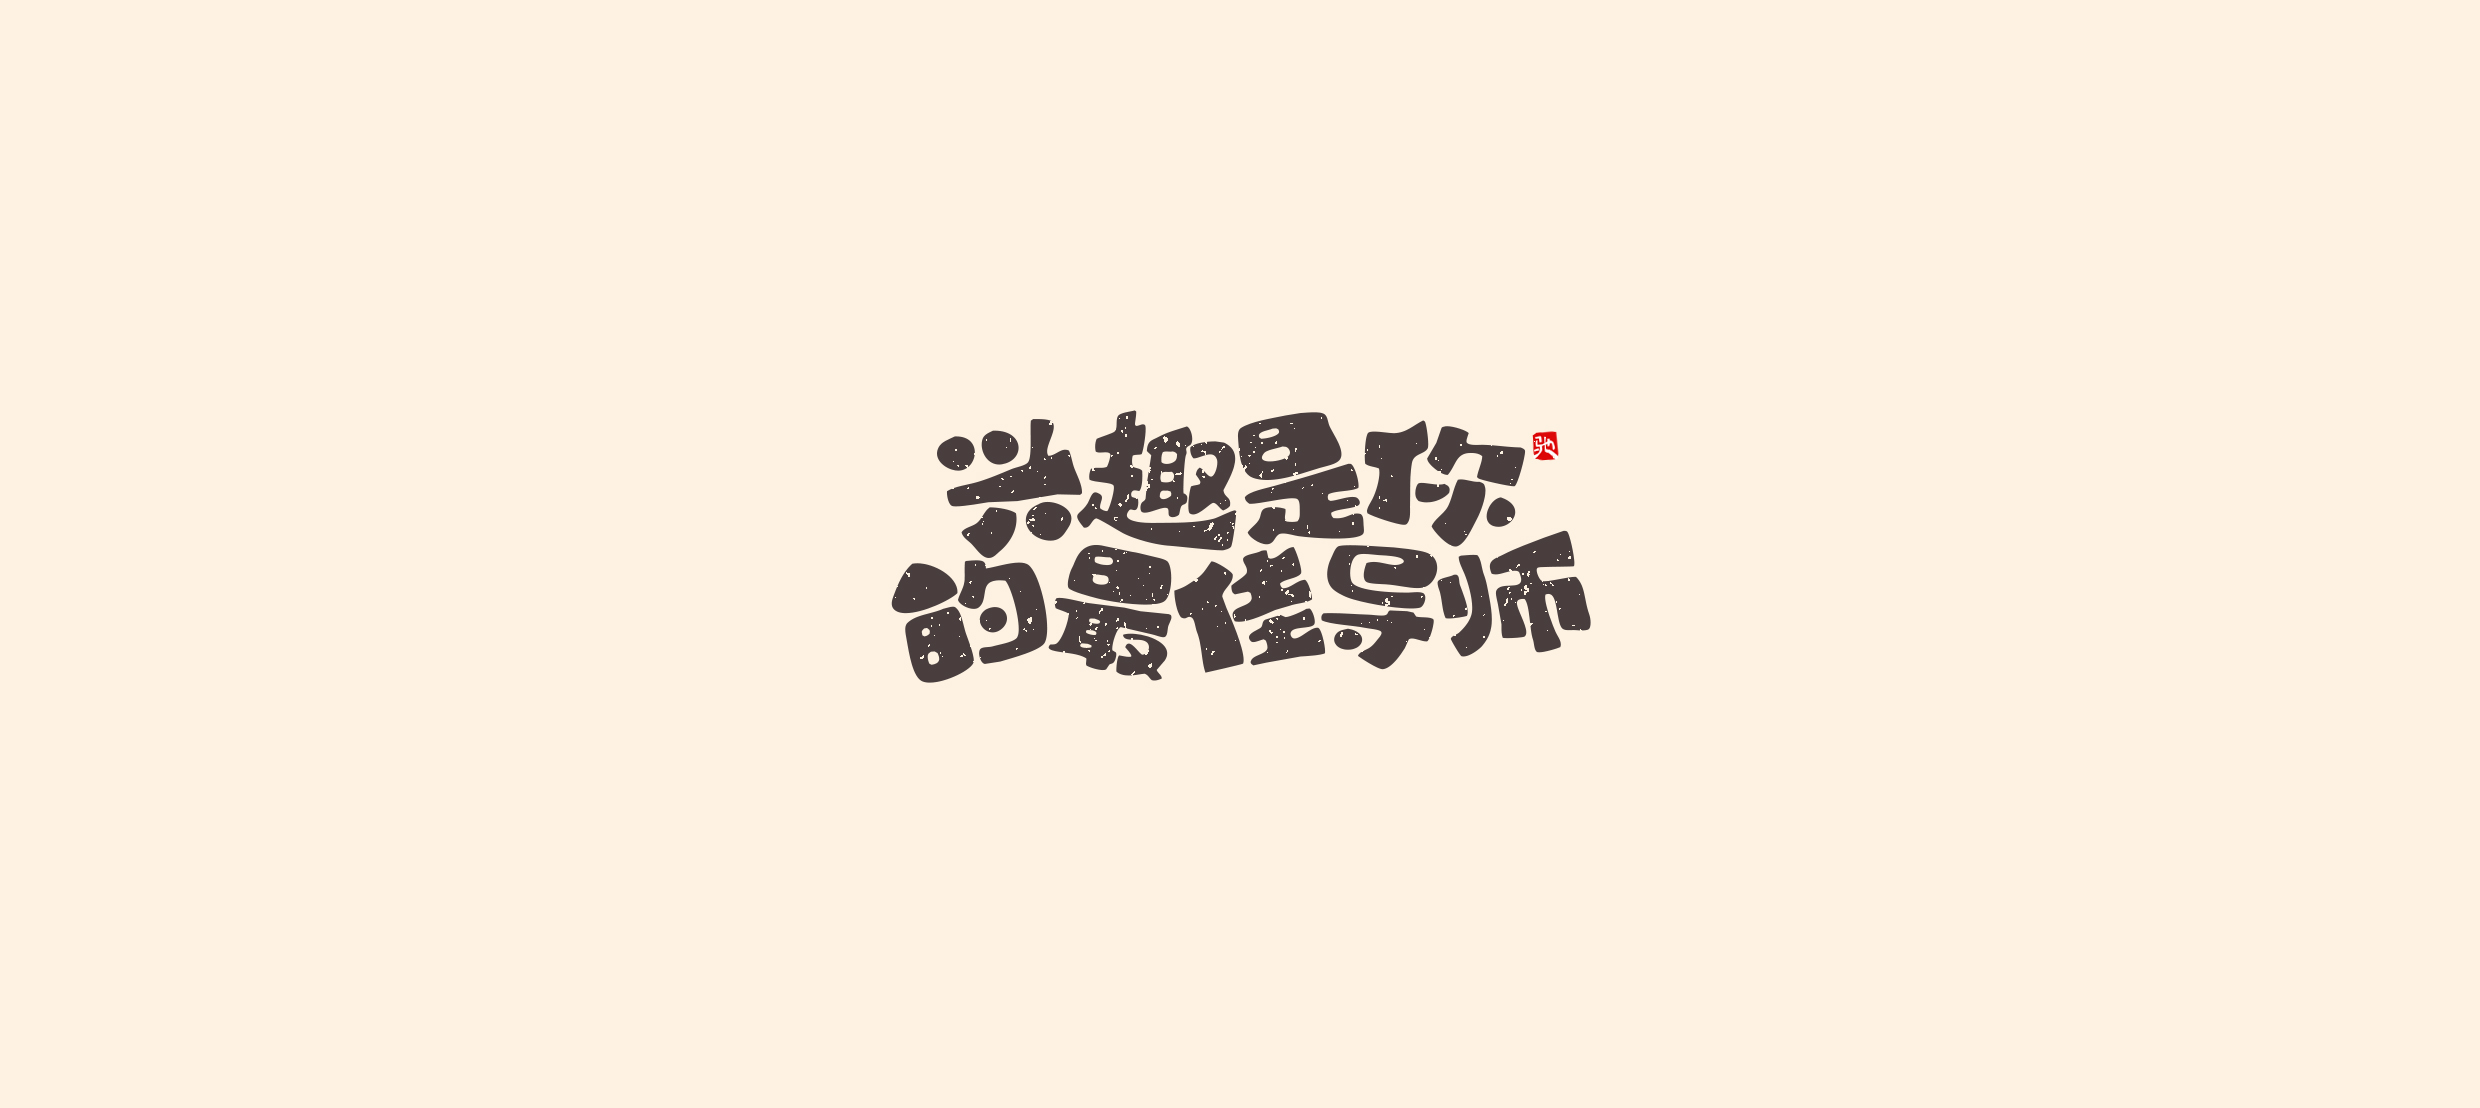 24P Collection of the latest Chinese font design schemes in 2021 #.86